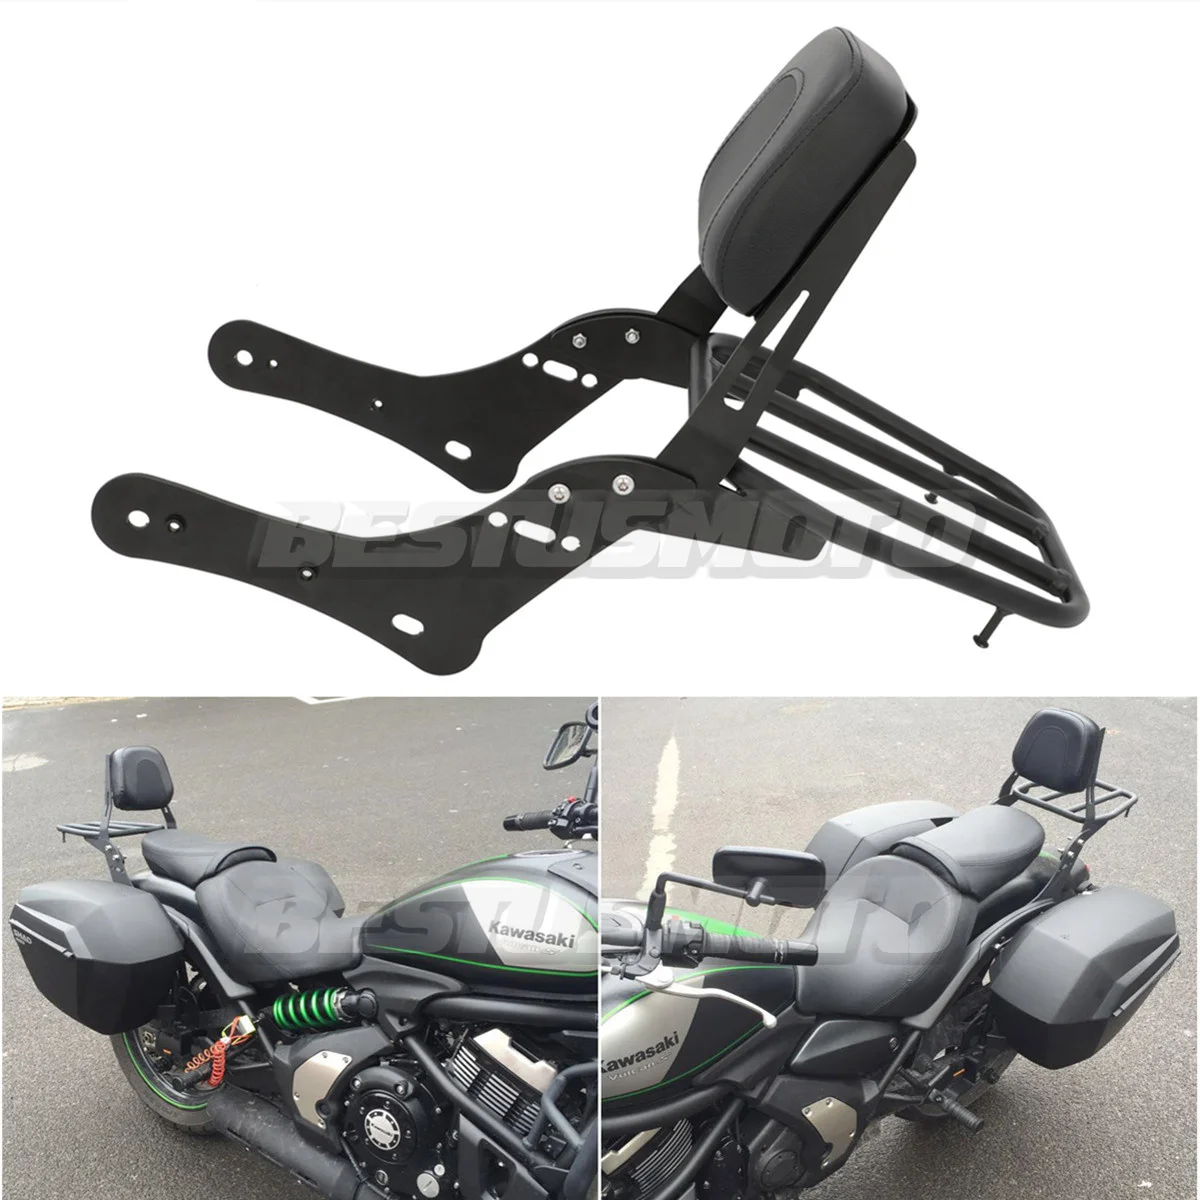 Promise Faster Backrest Sissy Bar Luggage Rack Pad Compatible For Kawasaki VN650 Vulcan S 650 2015-2020 